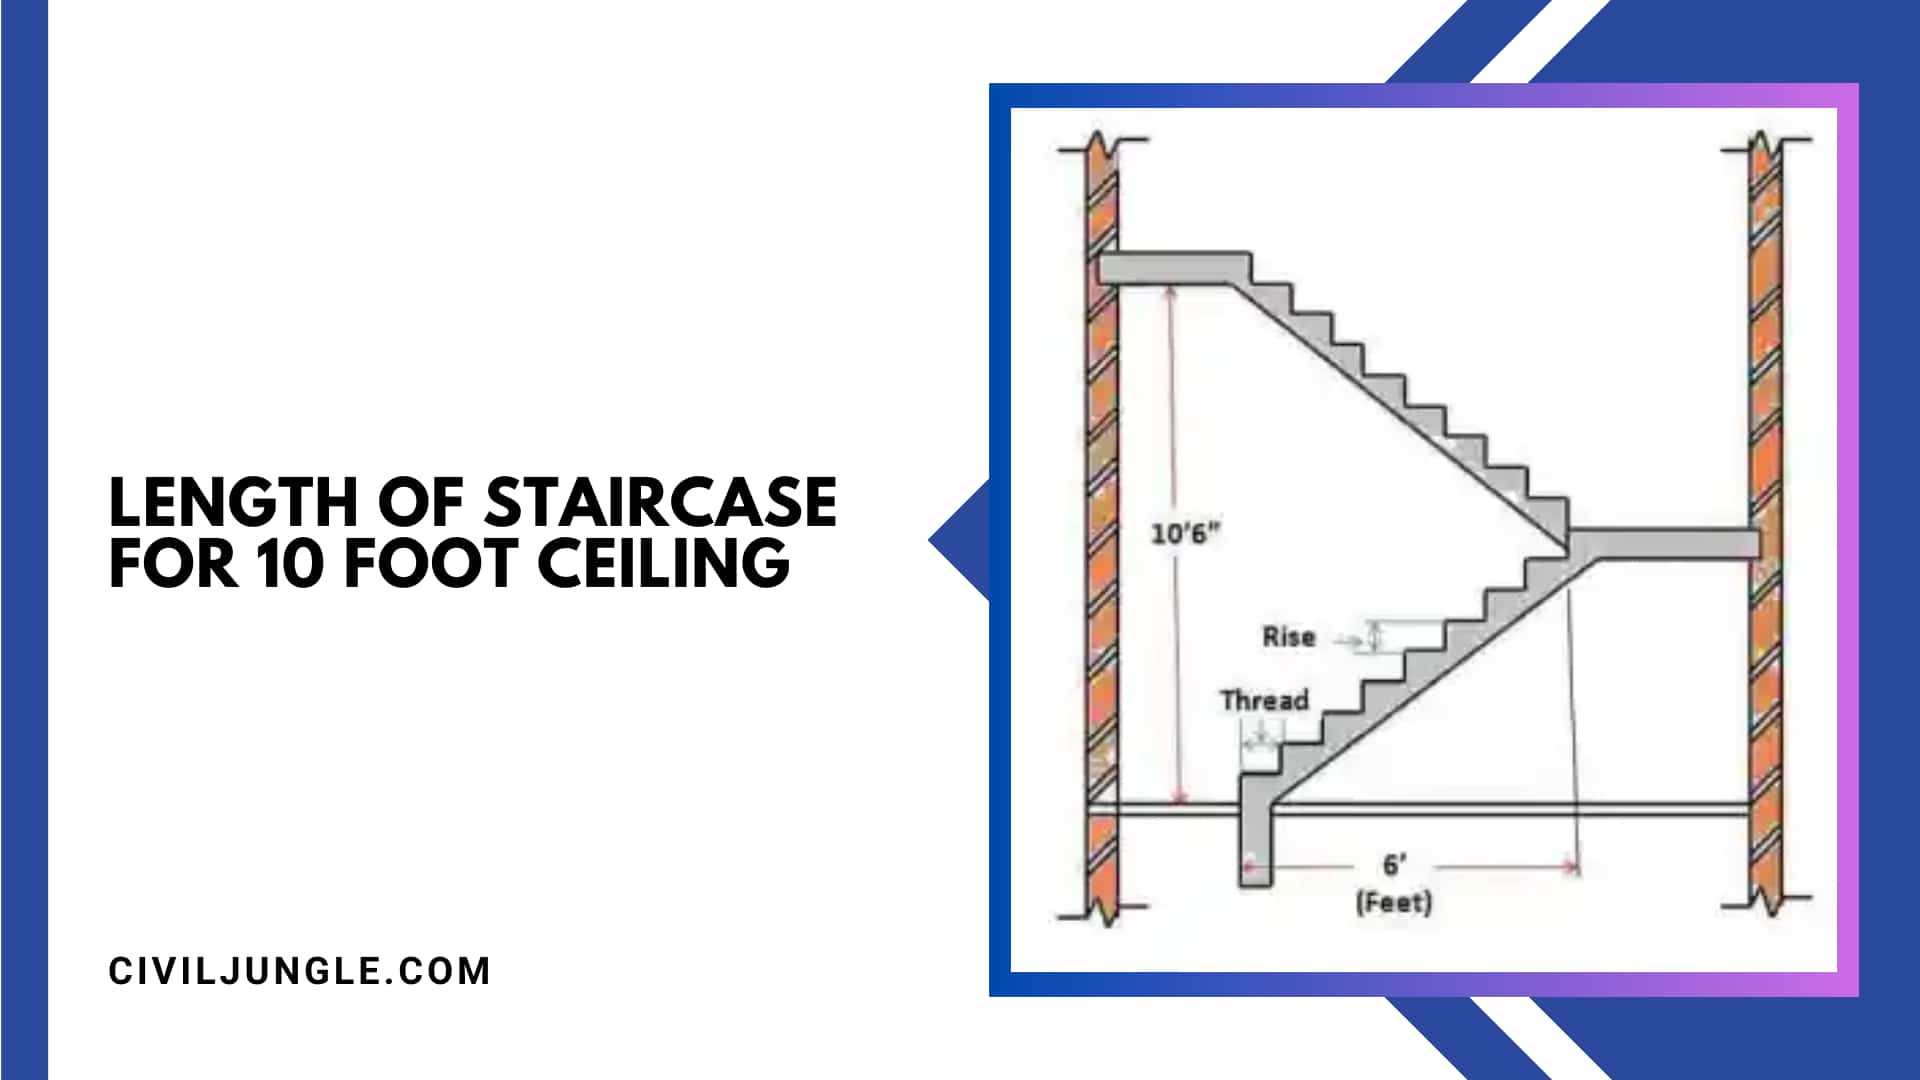 Length of Staircase for 10 Foot Ceiling